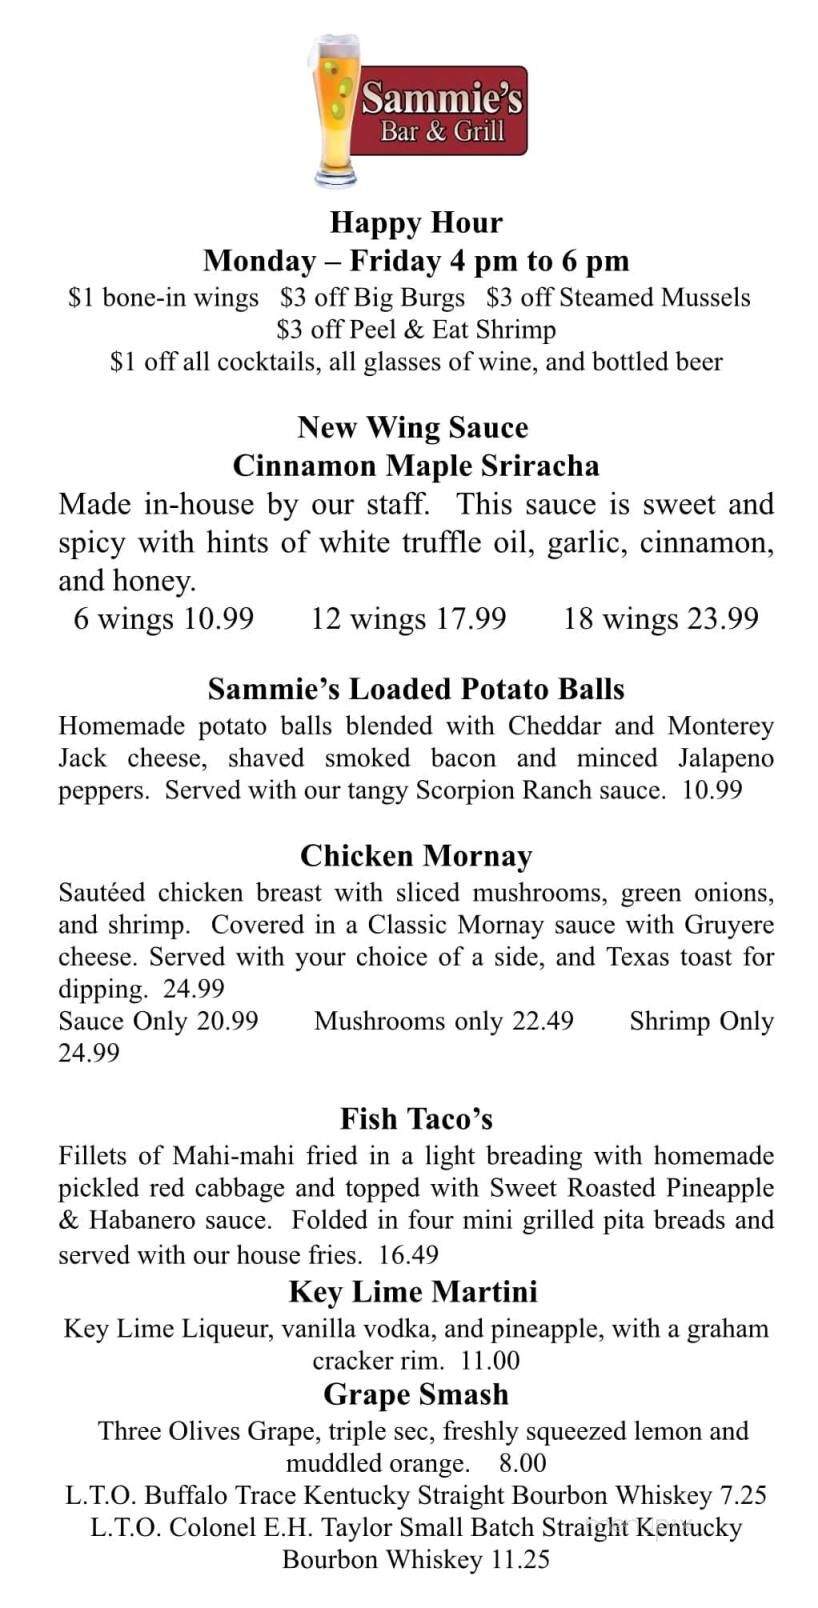 Sammie's Bar and Grill - Tallmadge, OH